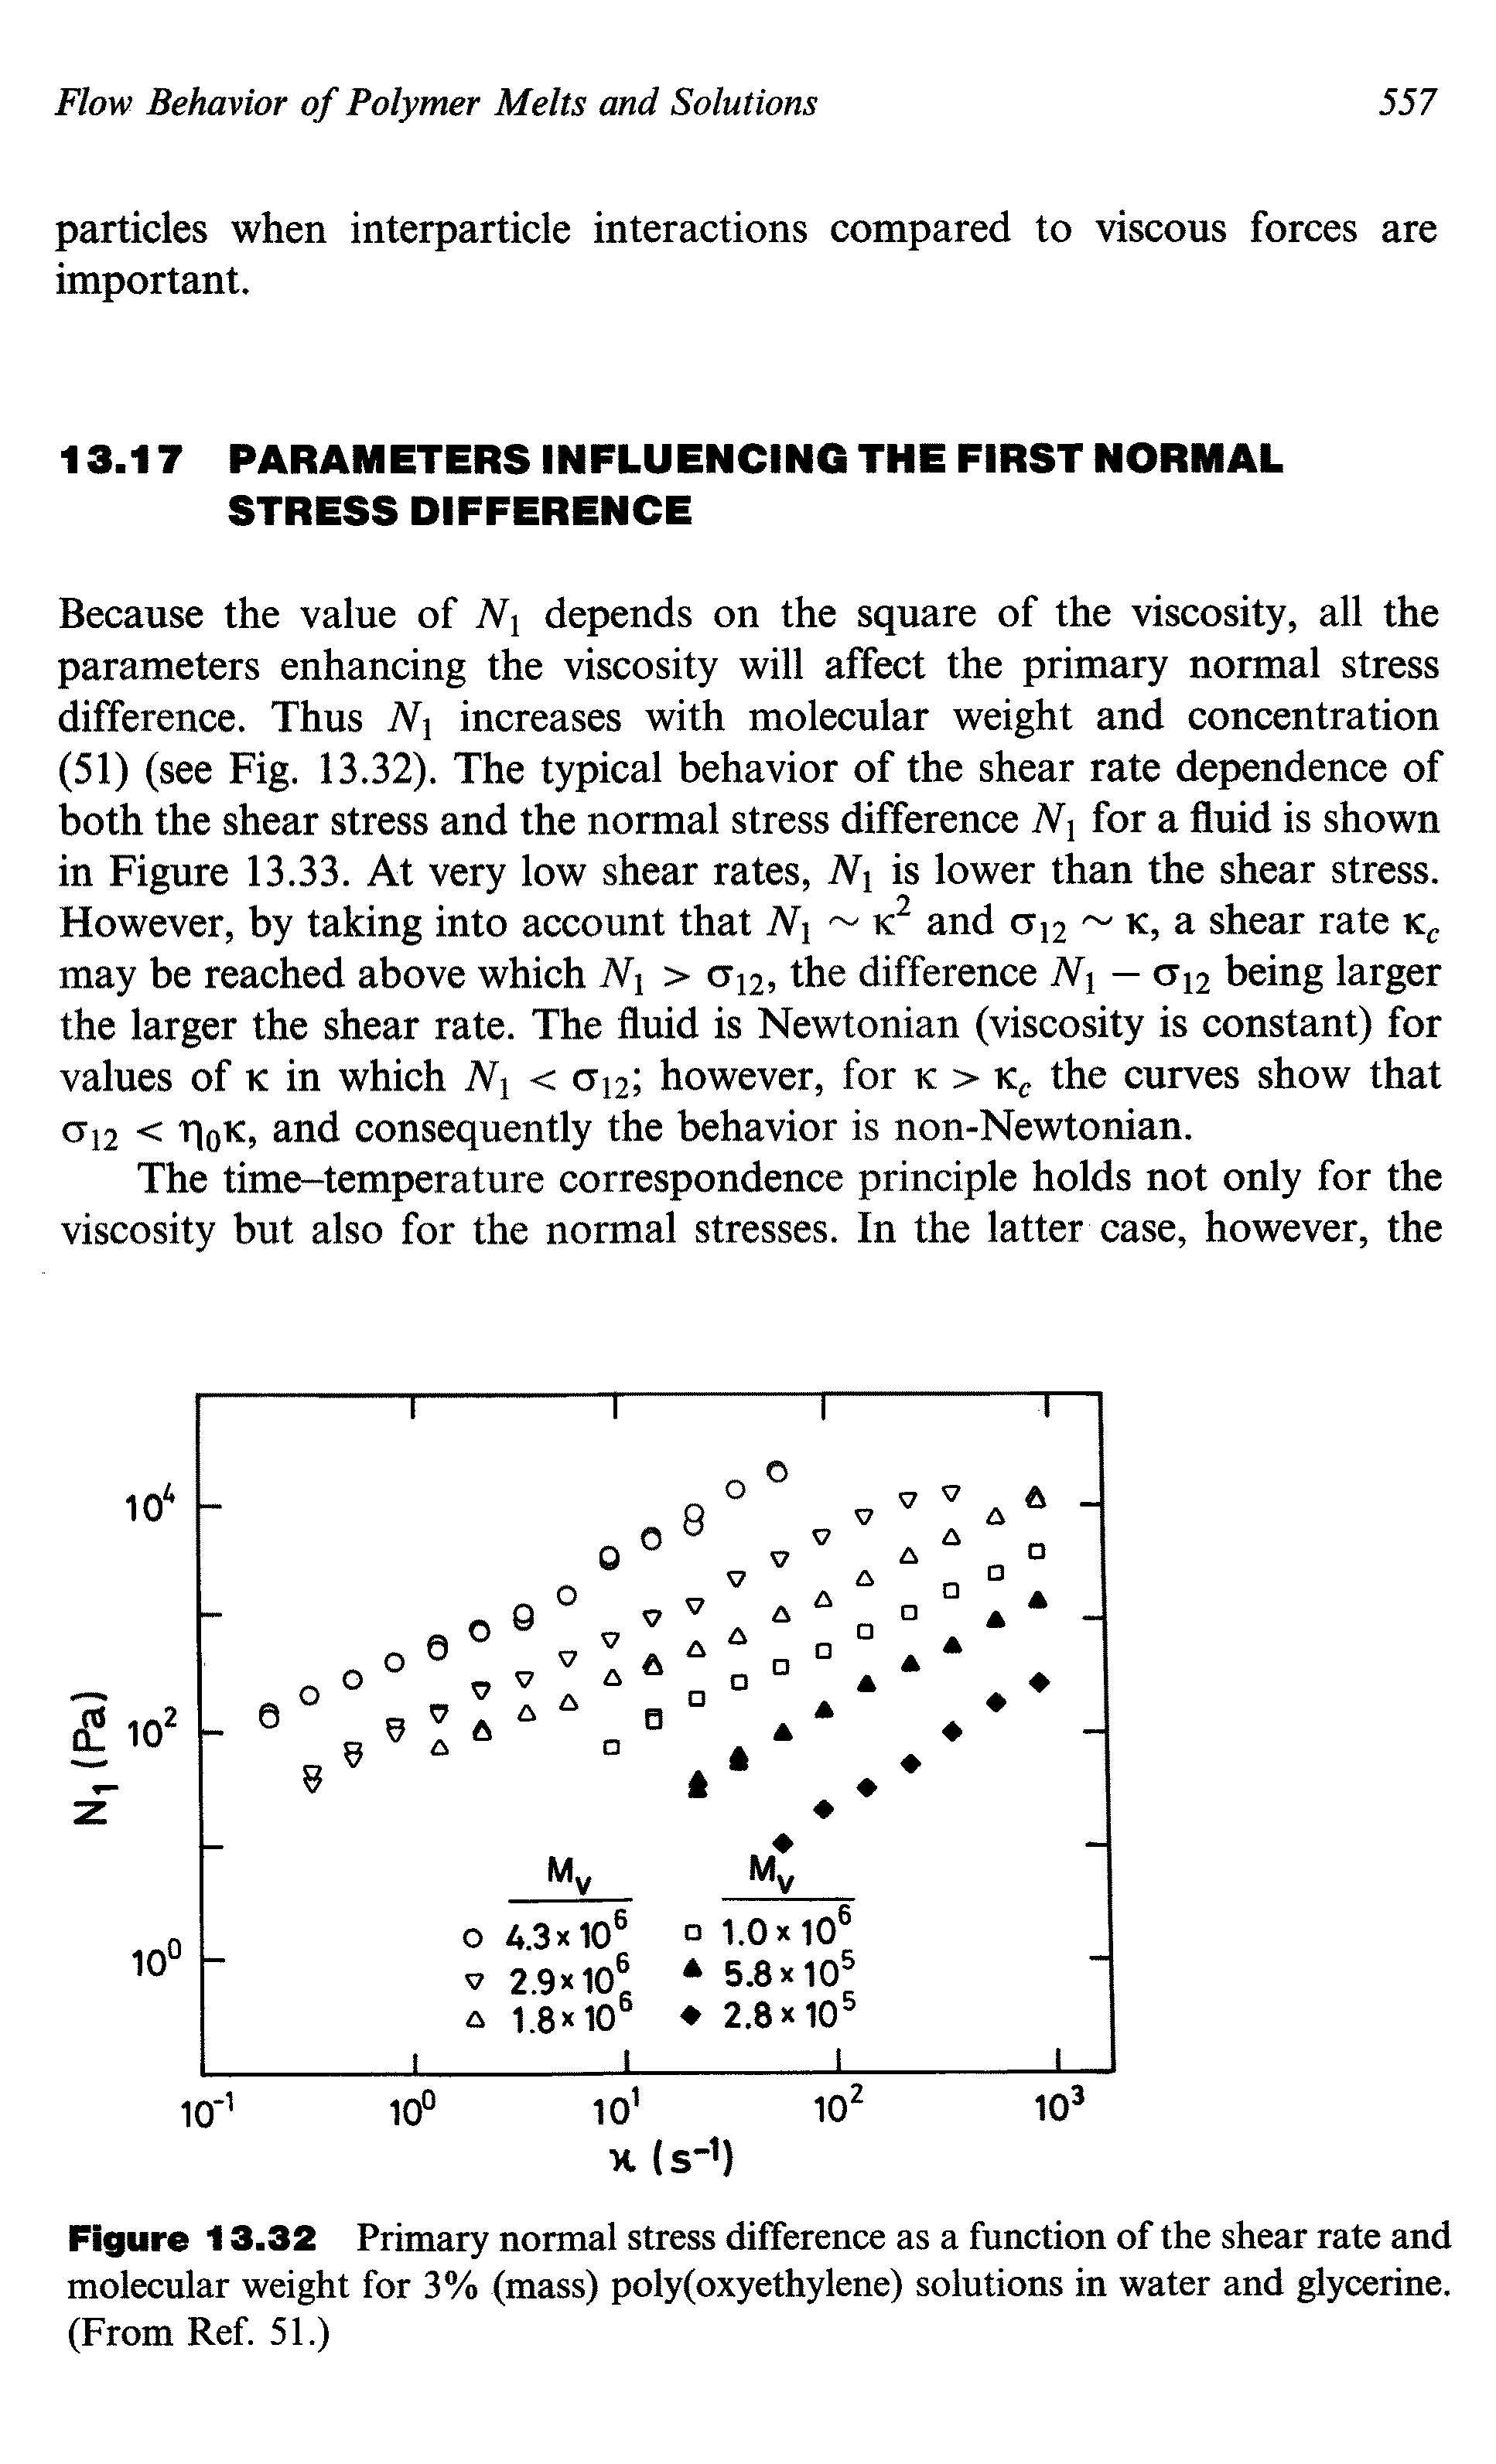 Figure 13.32 Primary normal stress difference as a function of the shear rate and molecular weight for 3% (mass) poly(oxyethylene) solutions in water and glycerine, (From Ref. 51.)...